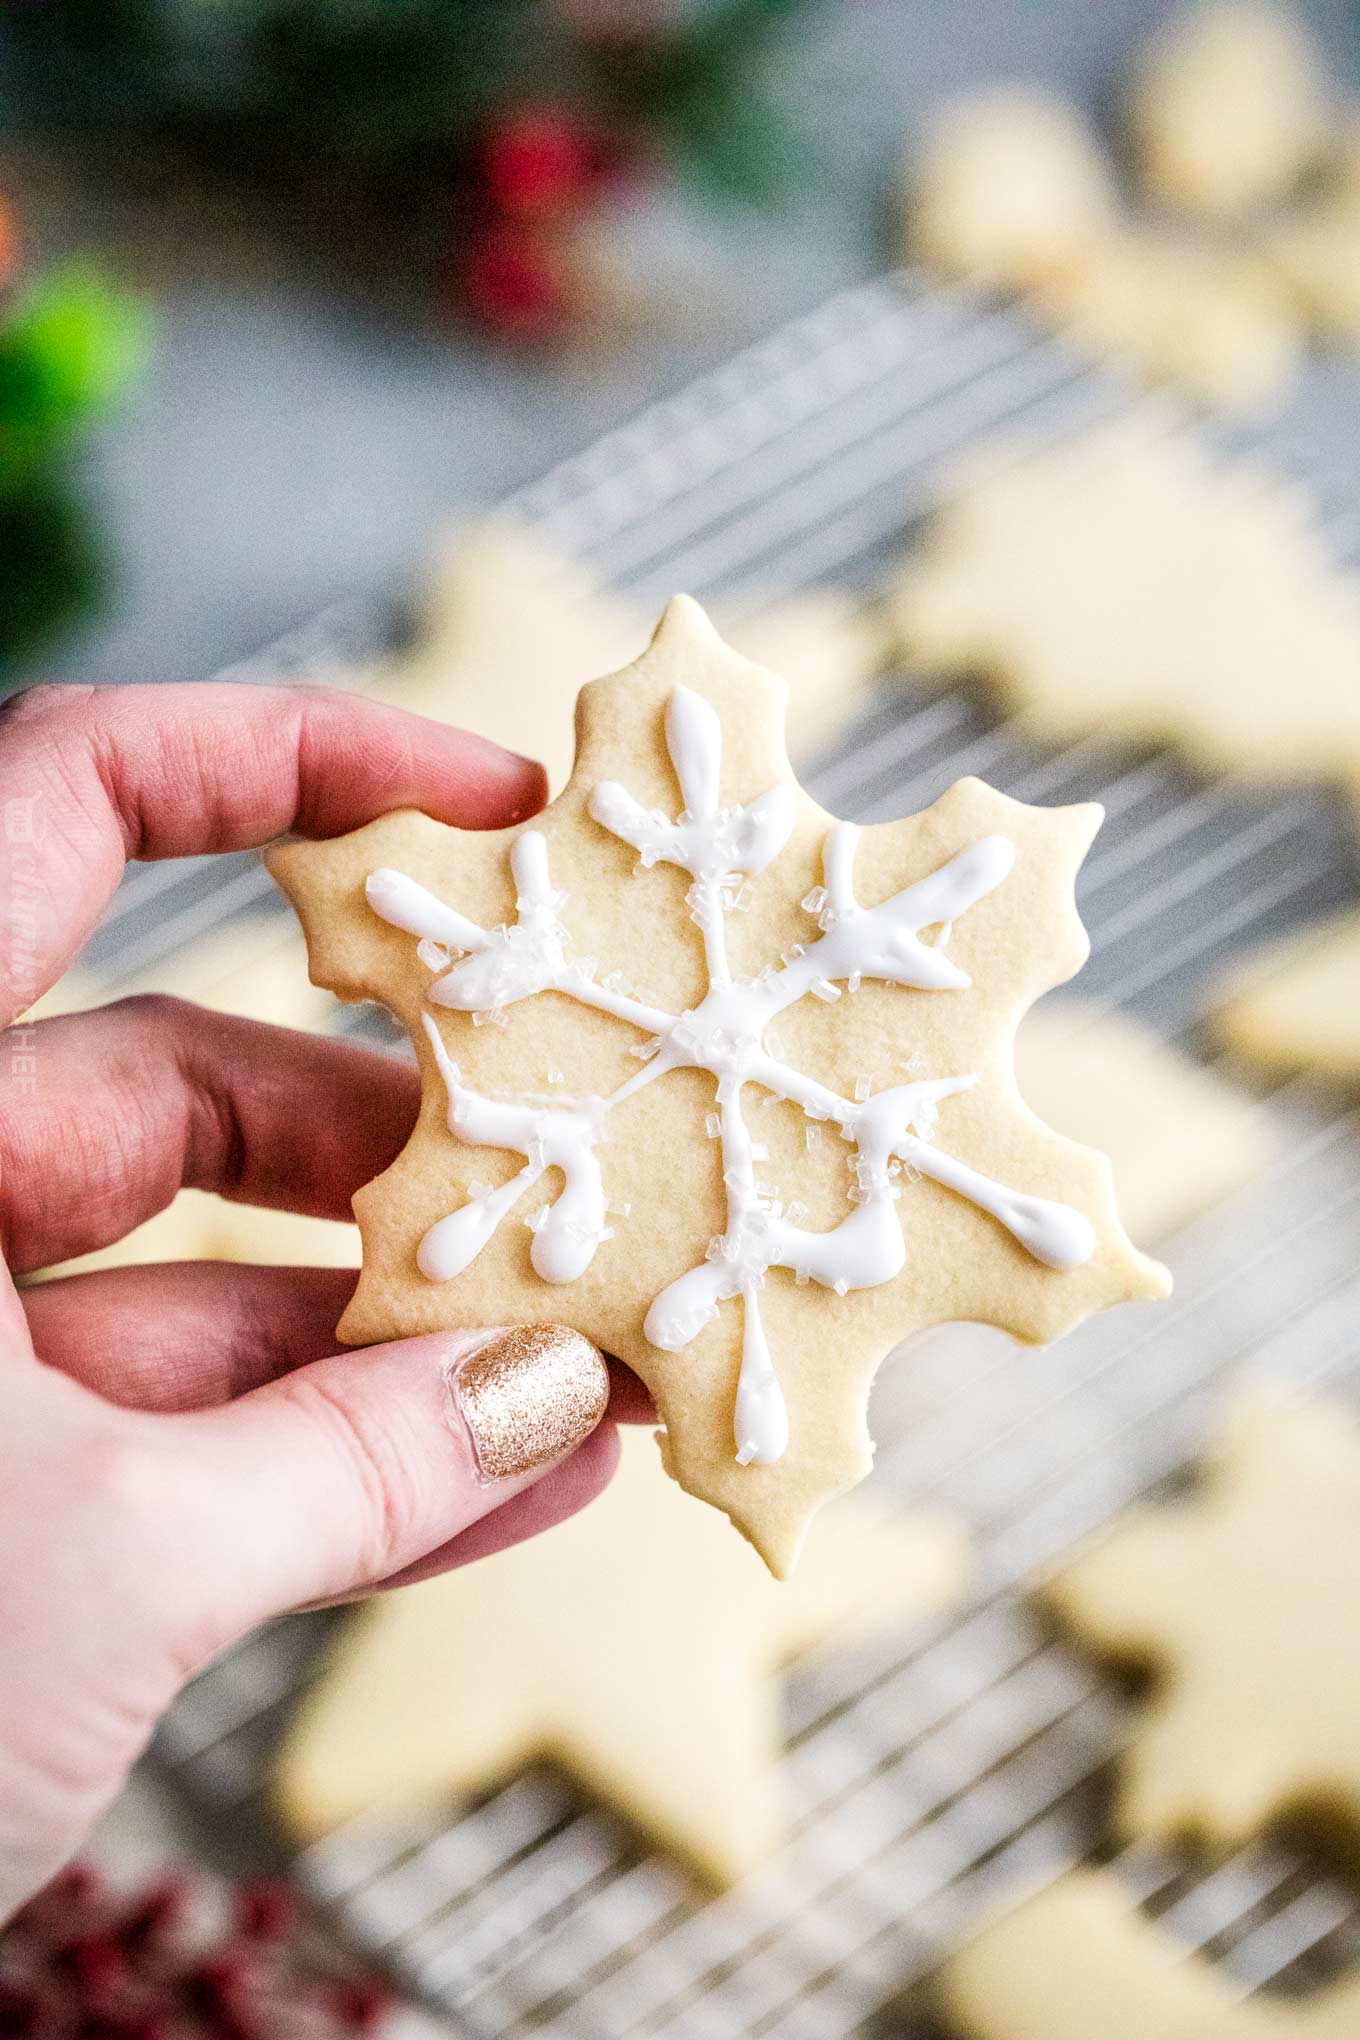 https://www.thechunkychef.com/wp-content/uploads/2019/11/Cut-Out-Sugar-Cookies-decorated.jpg